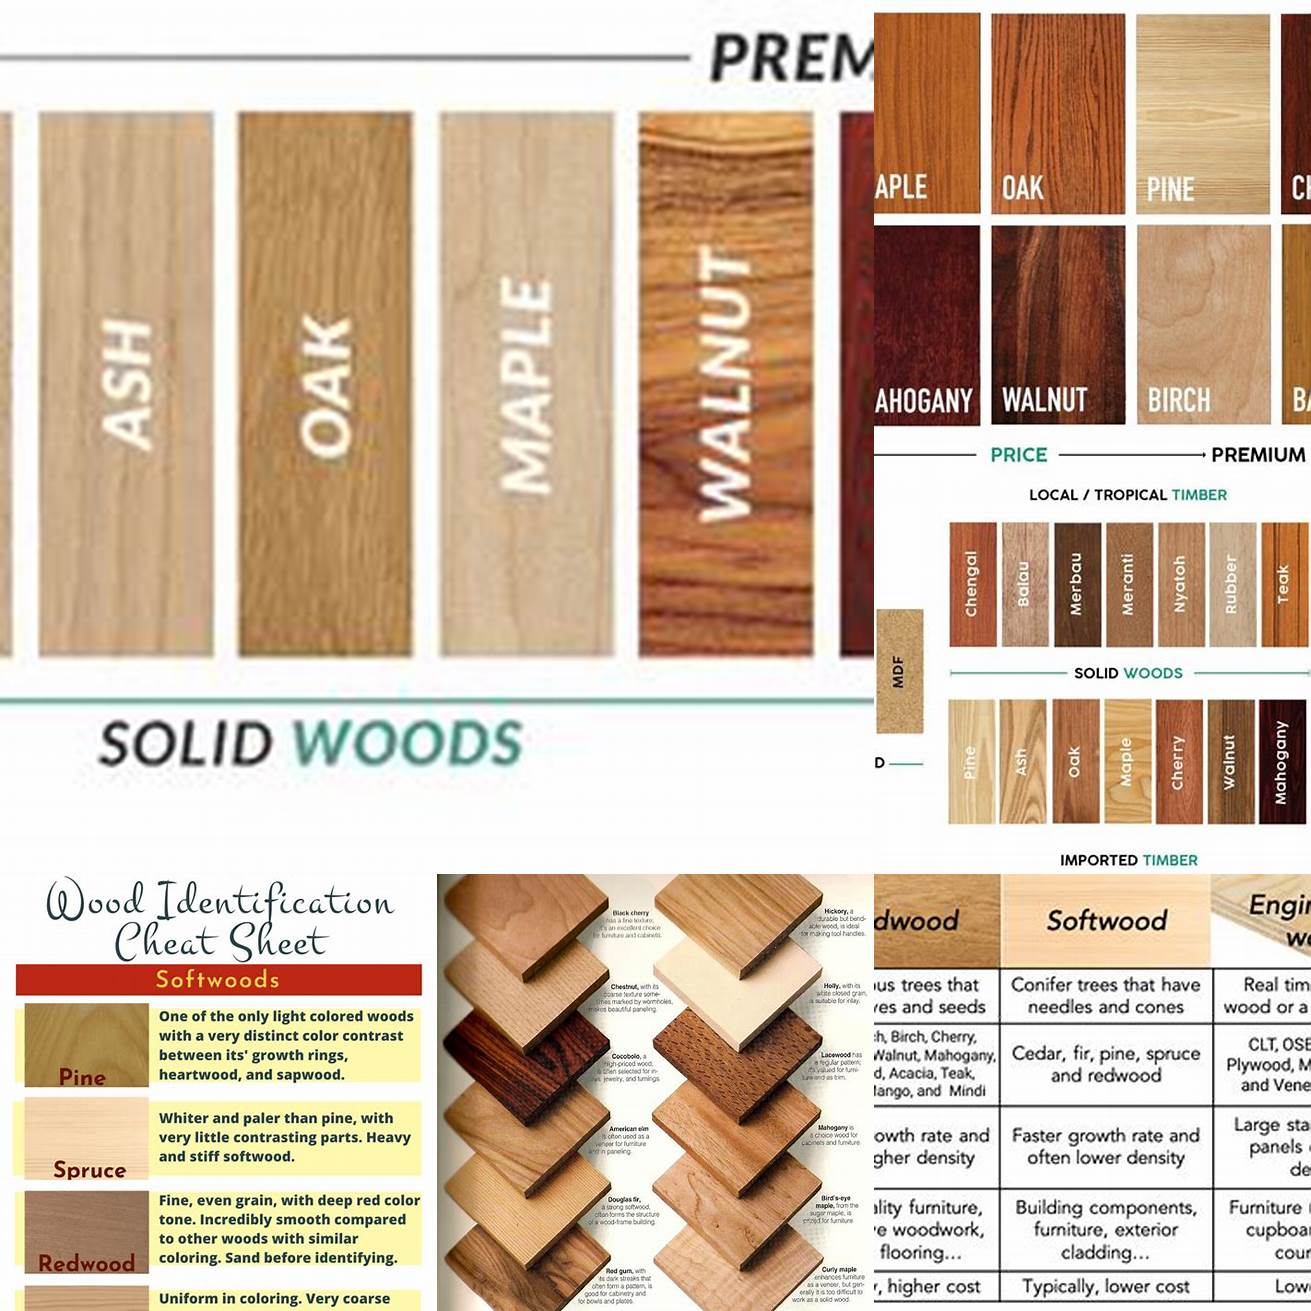 A comparison between different woods